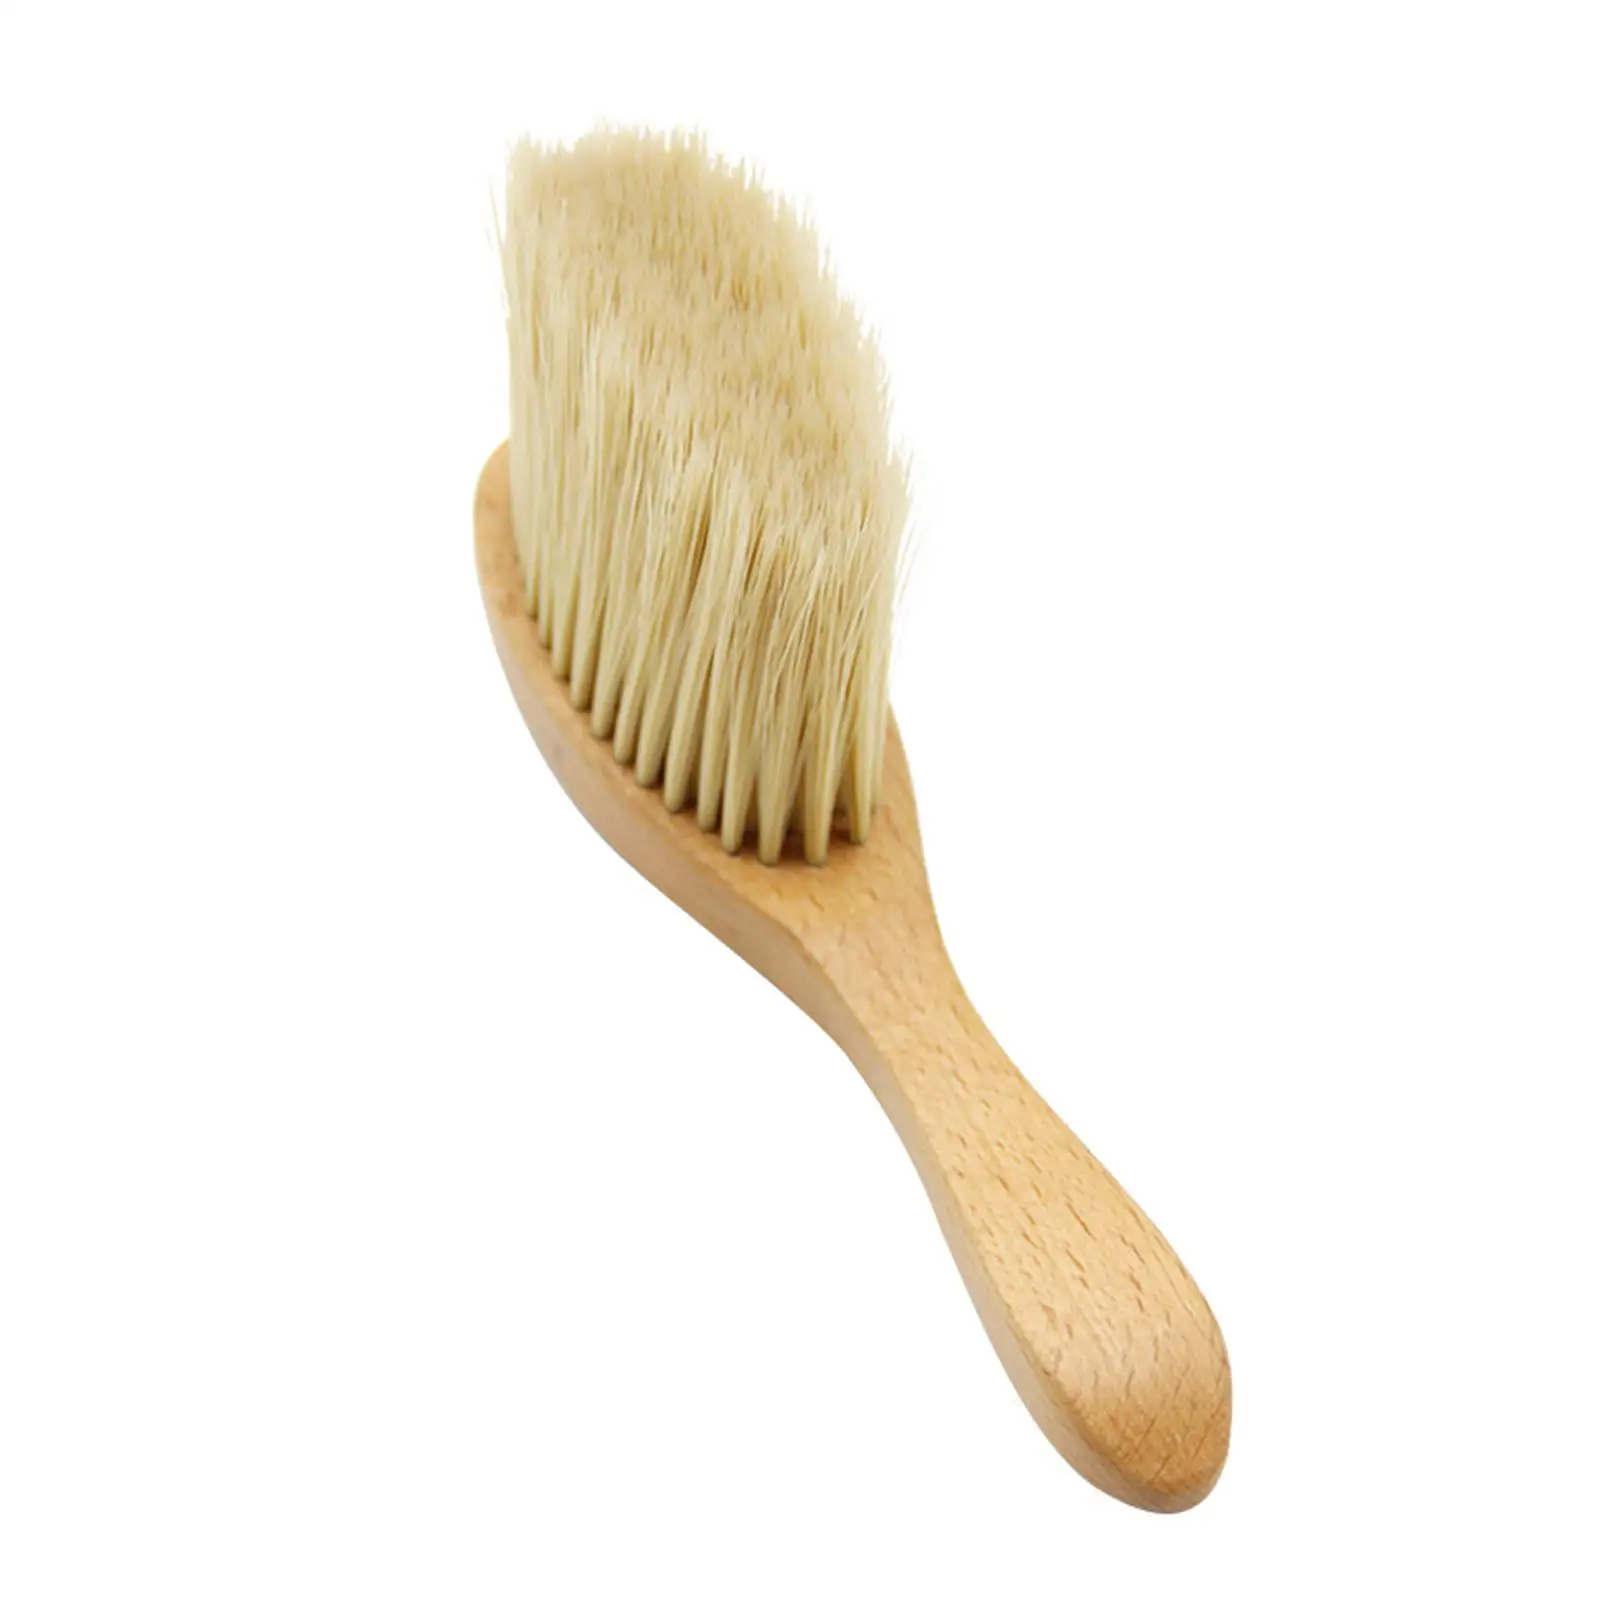 Nylon Soft Hair Sweeping Brush With Handle Wood Hairdressing Hair Cleaning Brush for Salon Household Hair Styling Tool